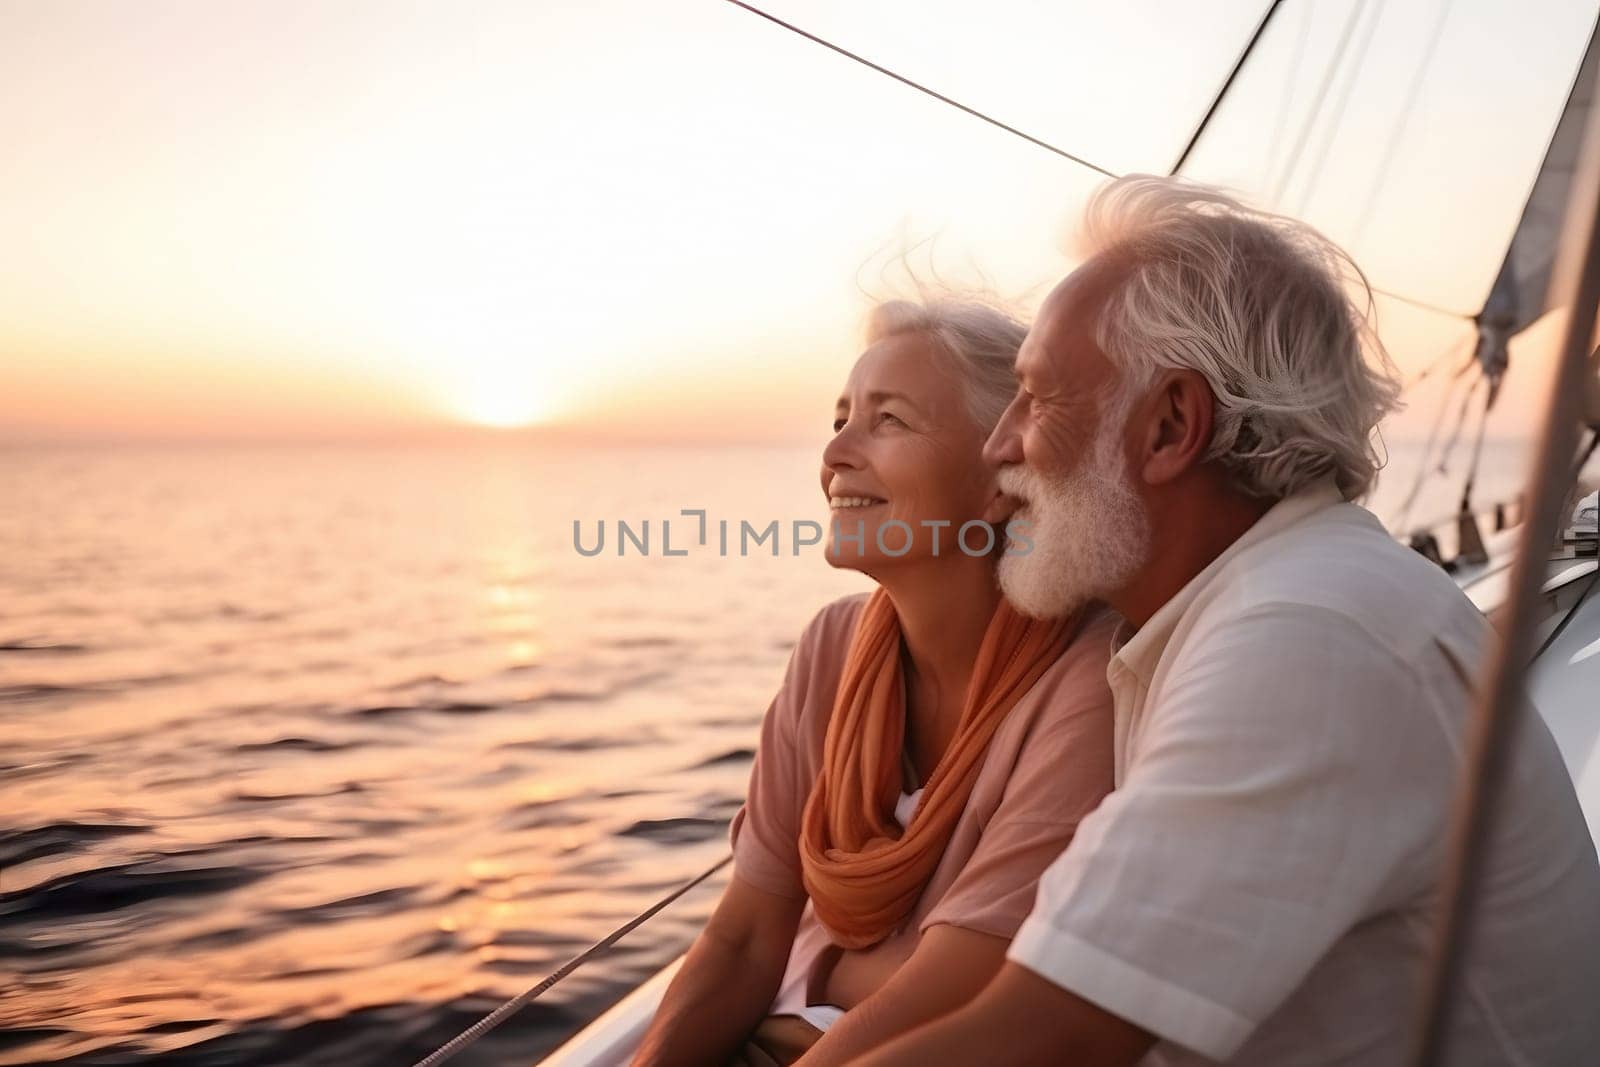 Beautiful and happy senior caucasian couple on a sailboat at sunset or sunrise, neural network generated image by z1b